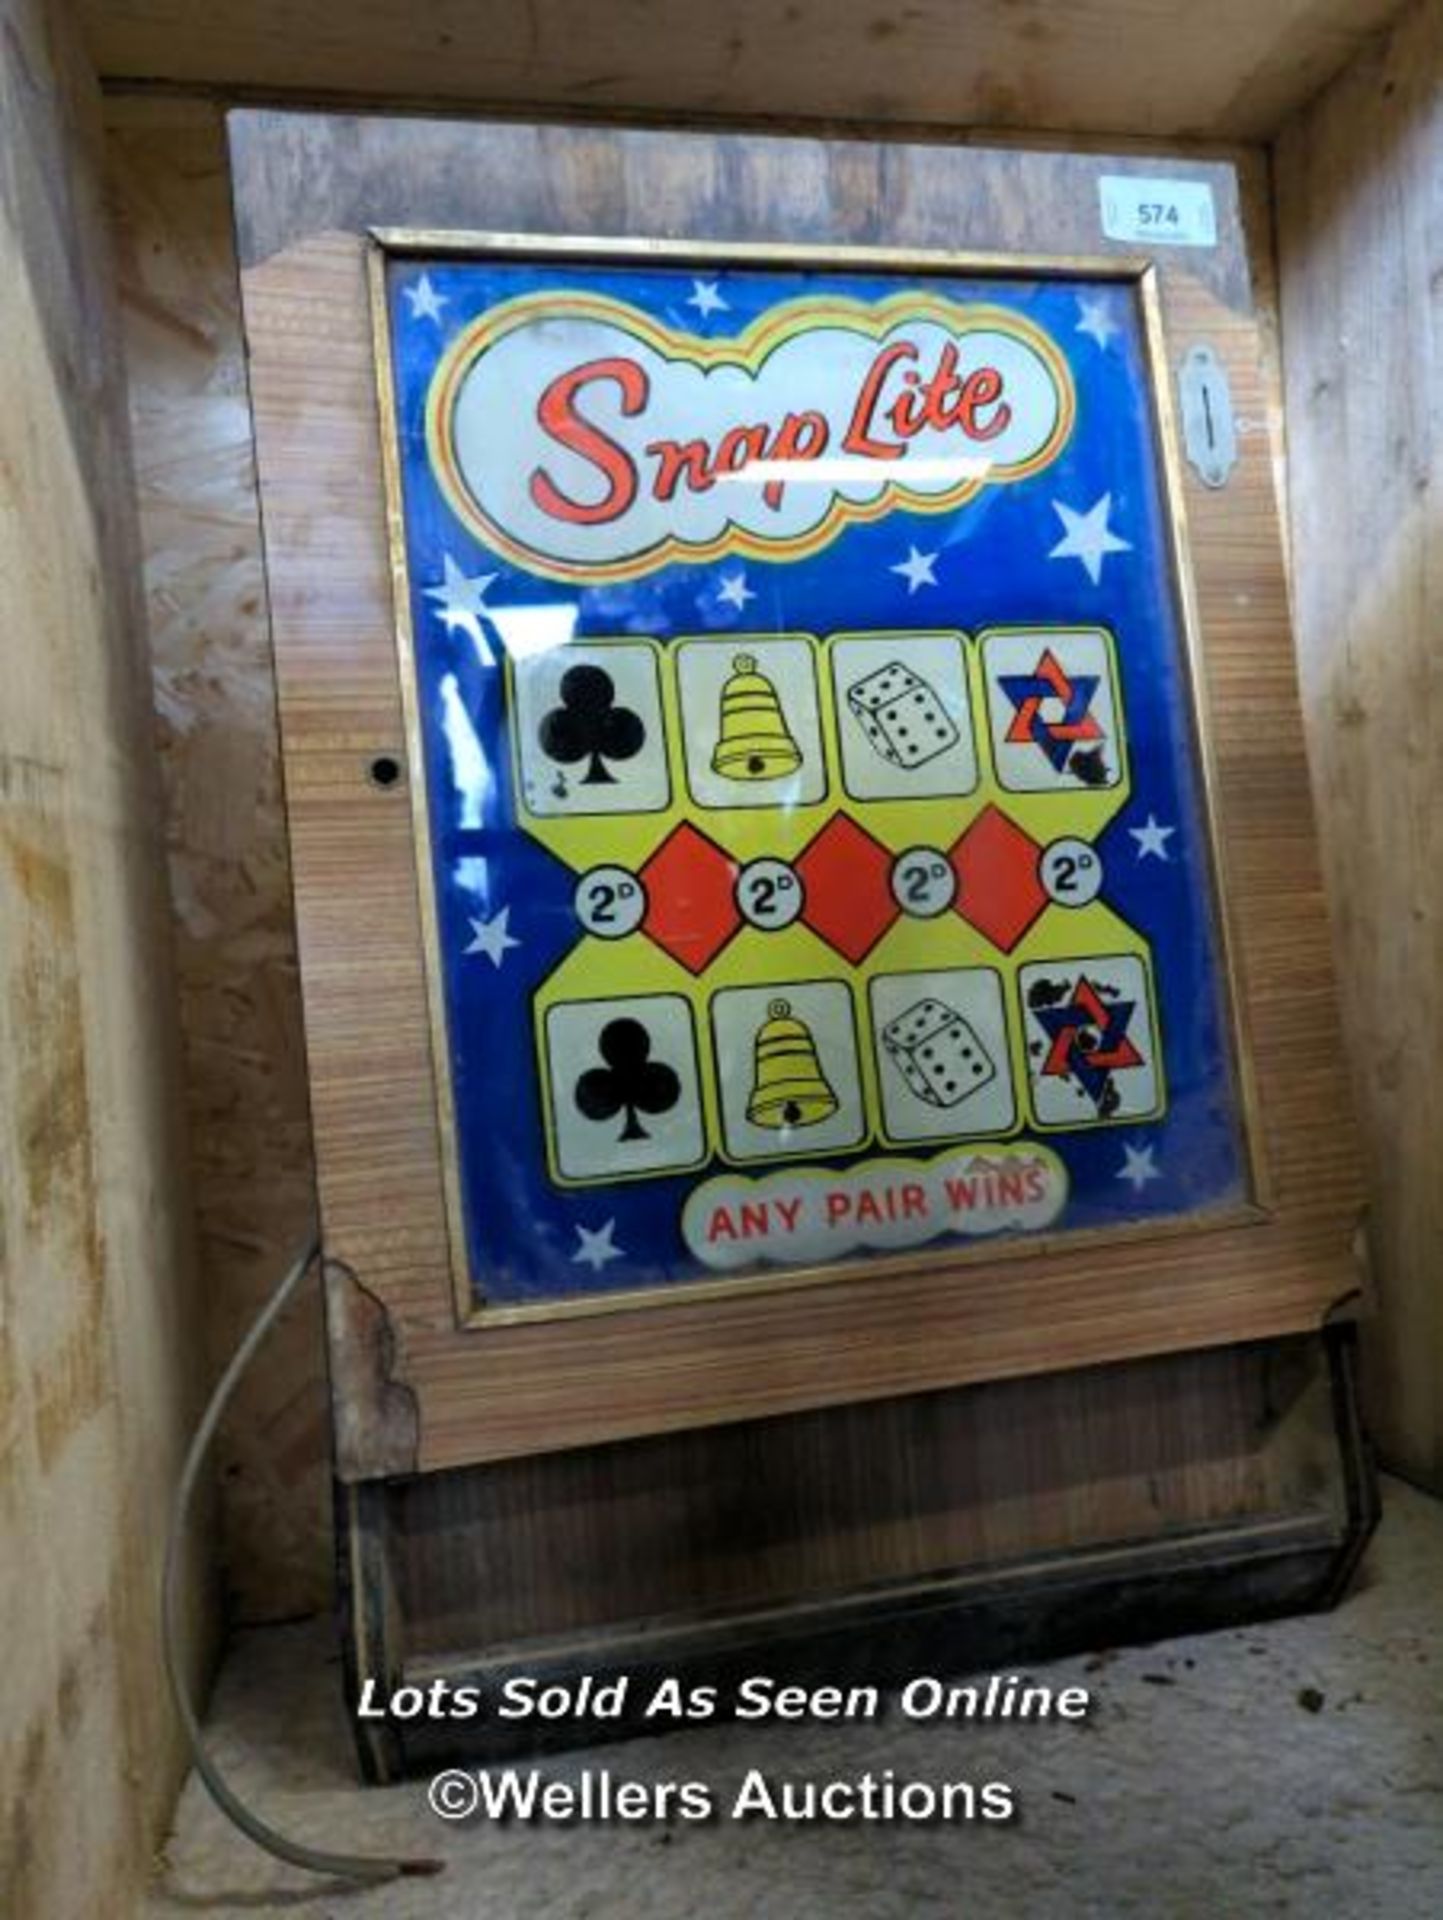 *VINTAGE FUN FAIR SNAP LITE SLOT MACHINE / ALL LOTS ARE LOCATED AT AUTHENTIC RECLAMATION TN5 7EF - Image 4 of 4